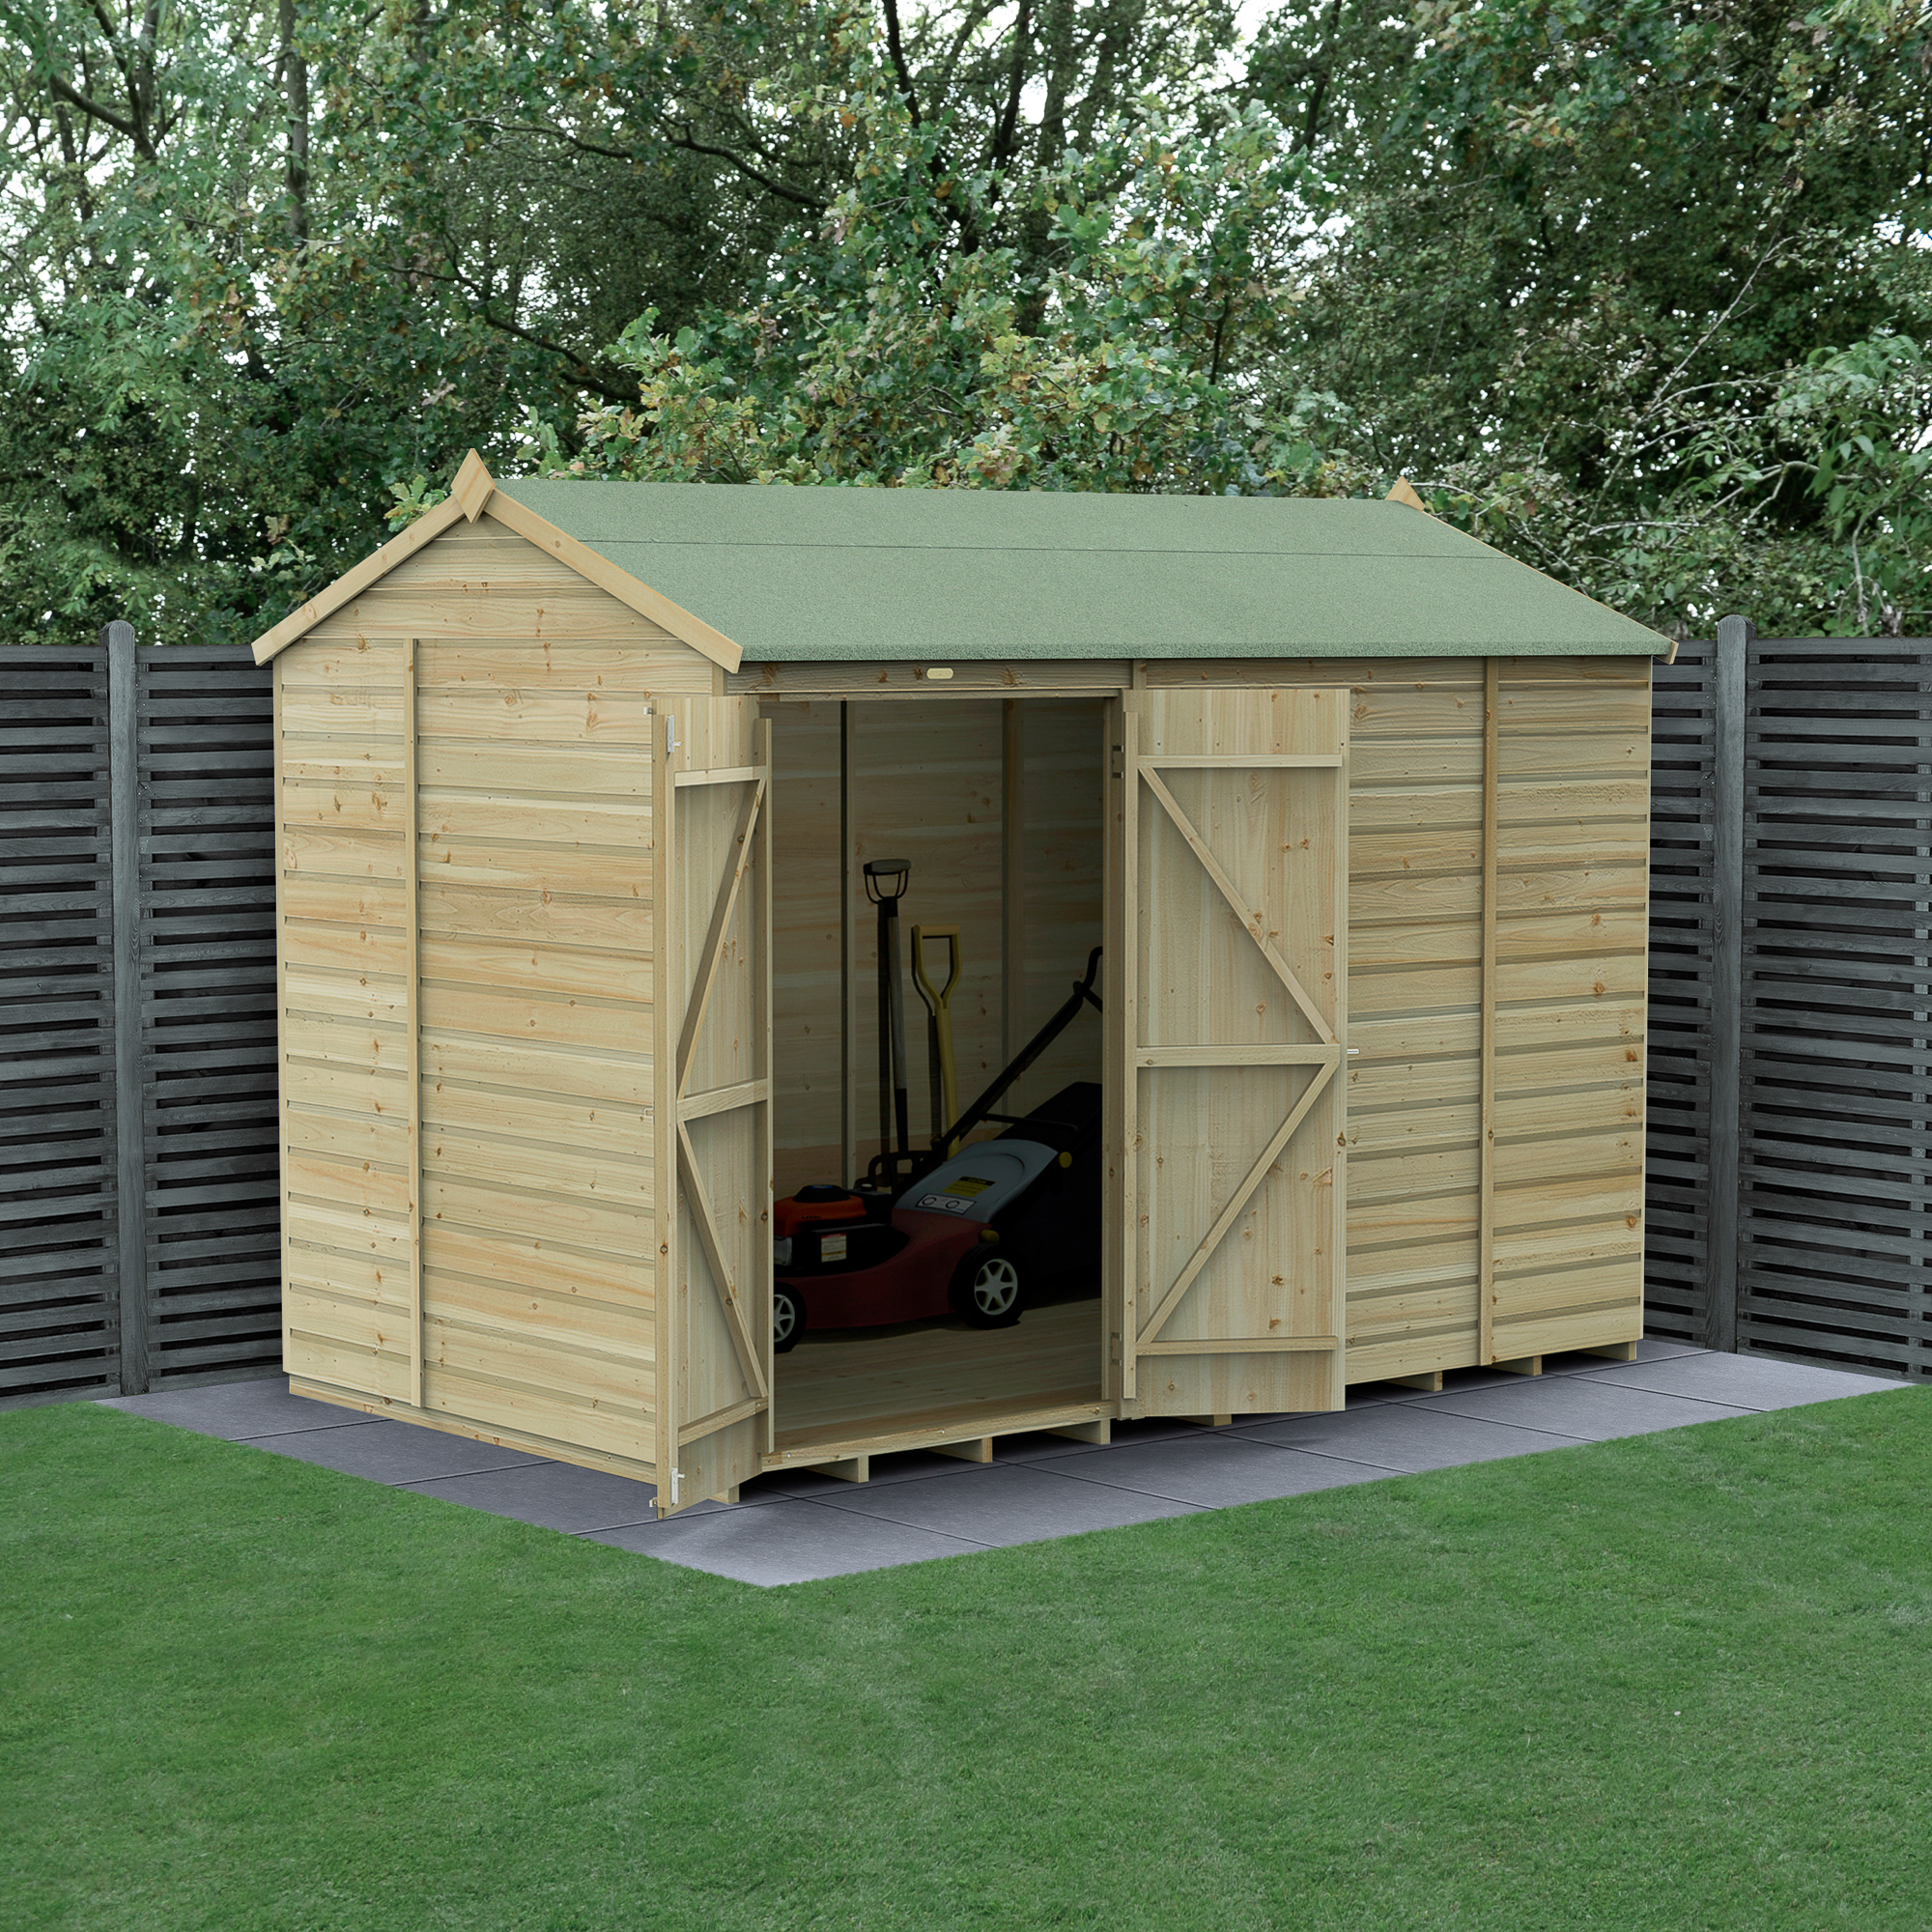 Forest Garden Beckwood 10 x 6ft Reverse Apex Shiplap Pressure Treated Double Door Windowless Shed